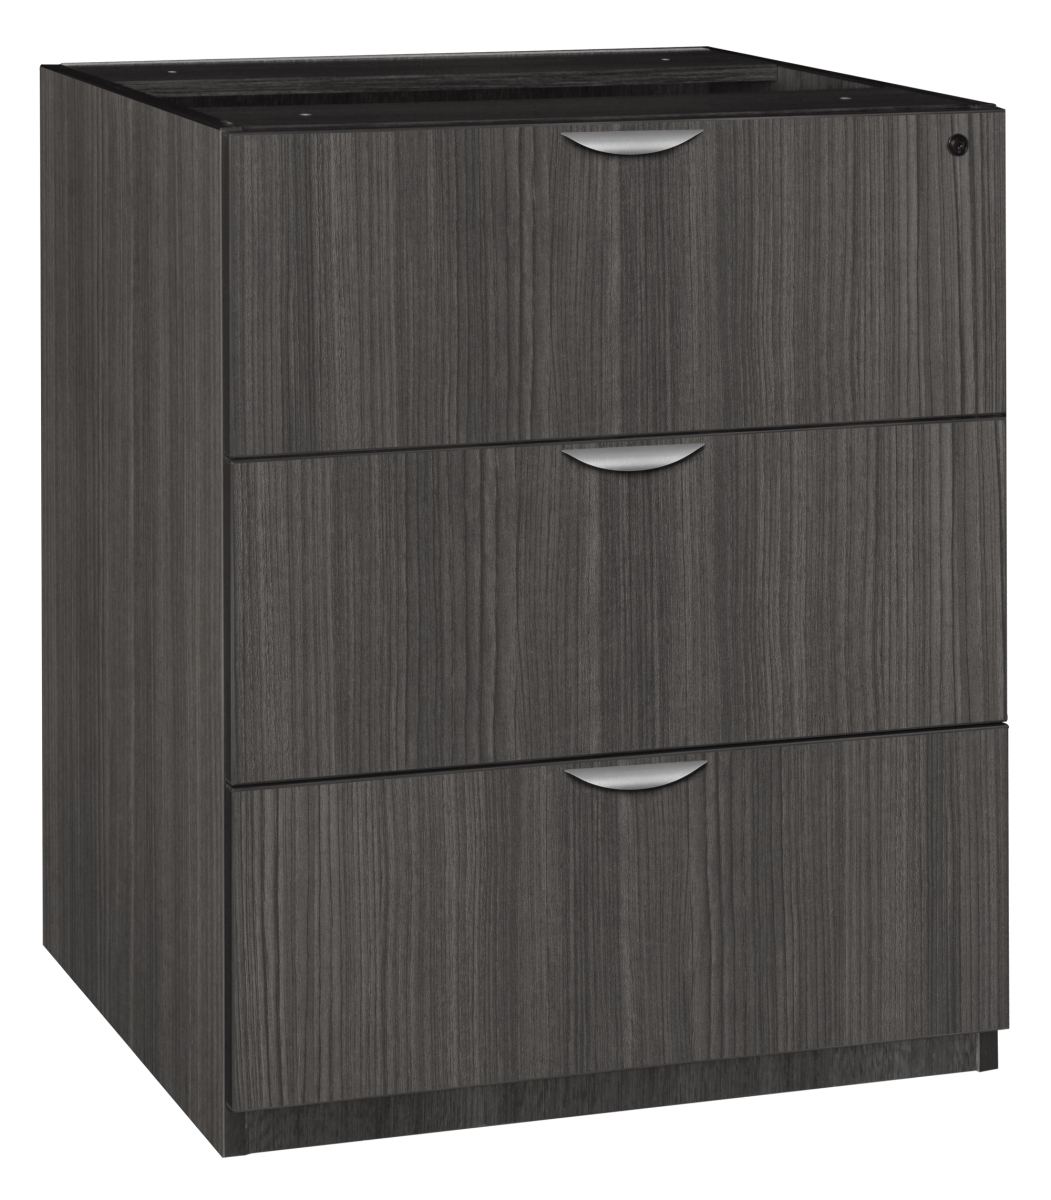 Lplf4136ag Legacy Stand Up Lateral File Without Top, Ash Grey